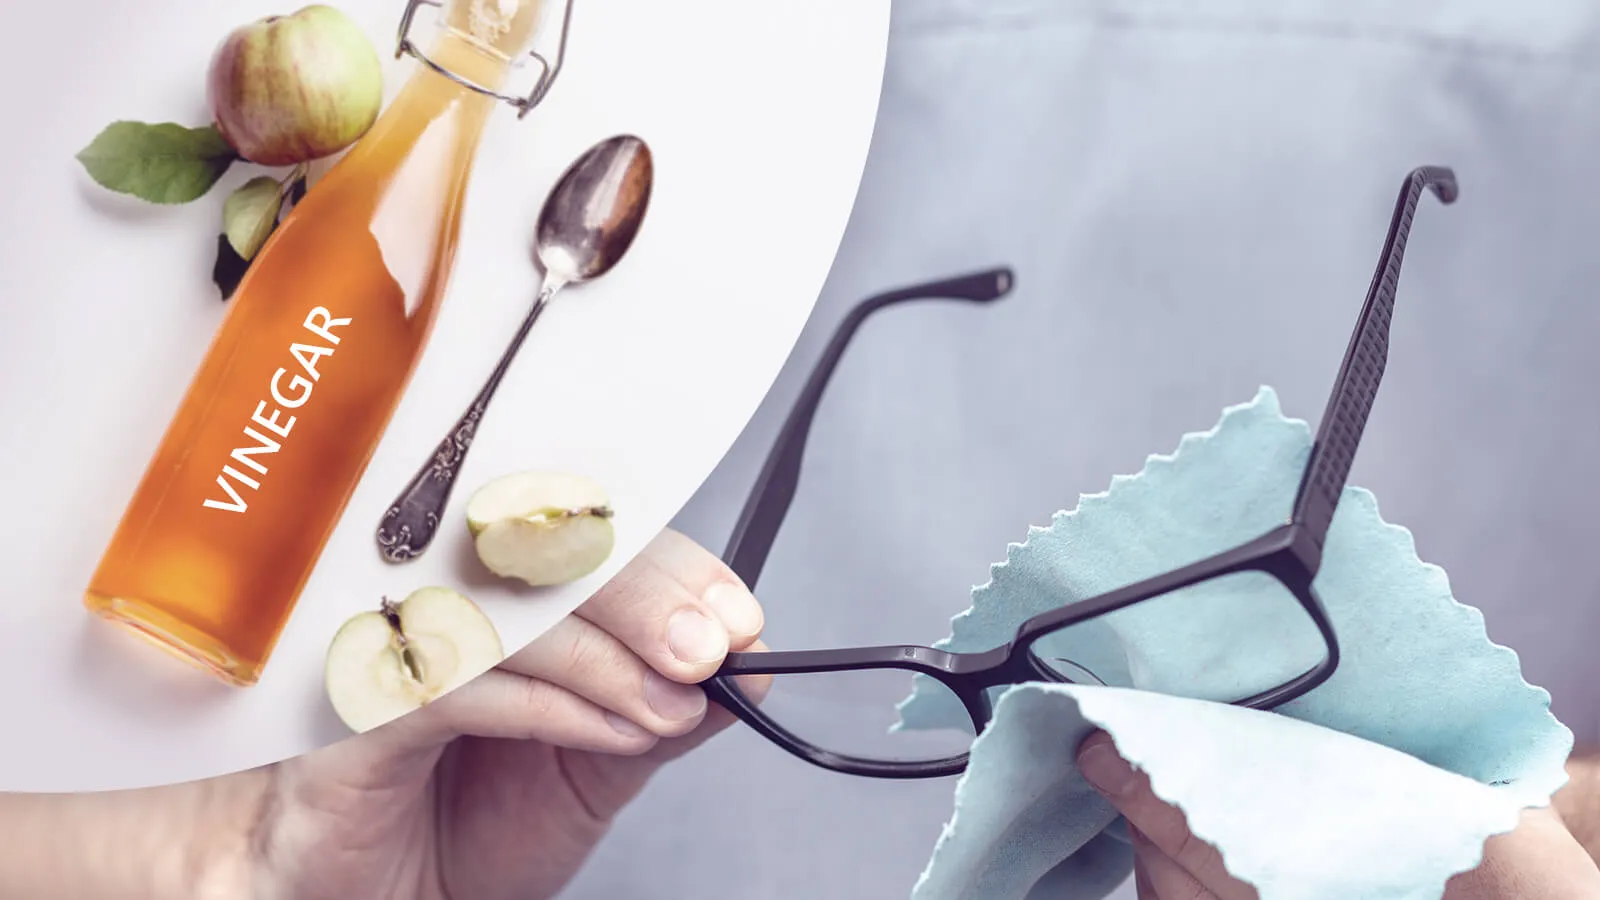 How to clean glasses with vinegar